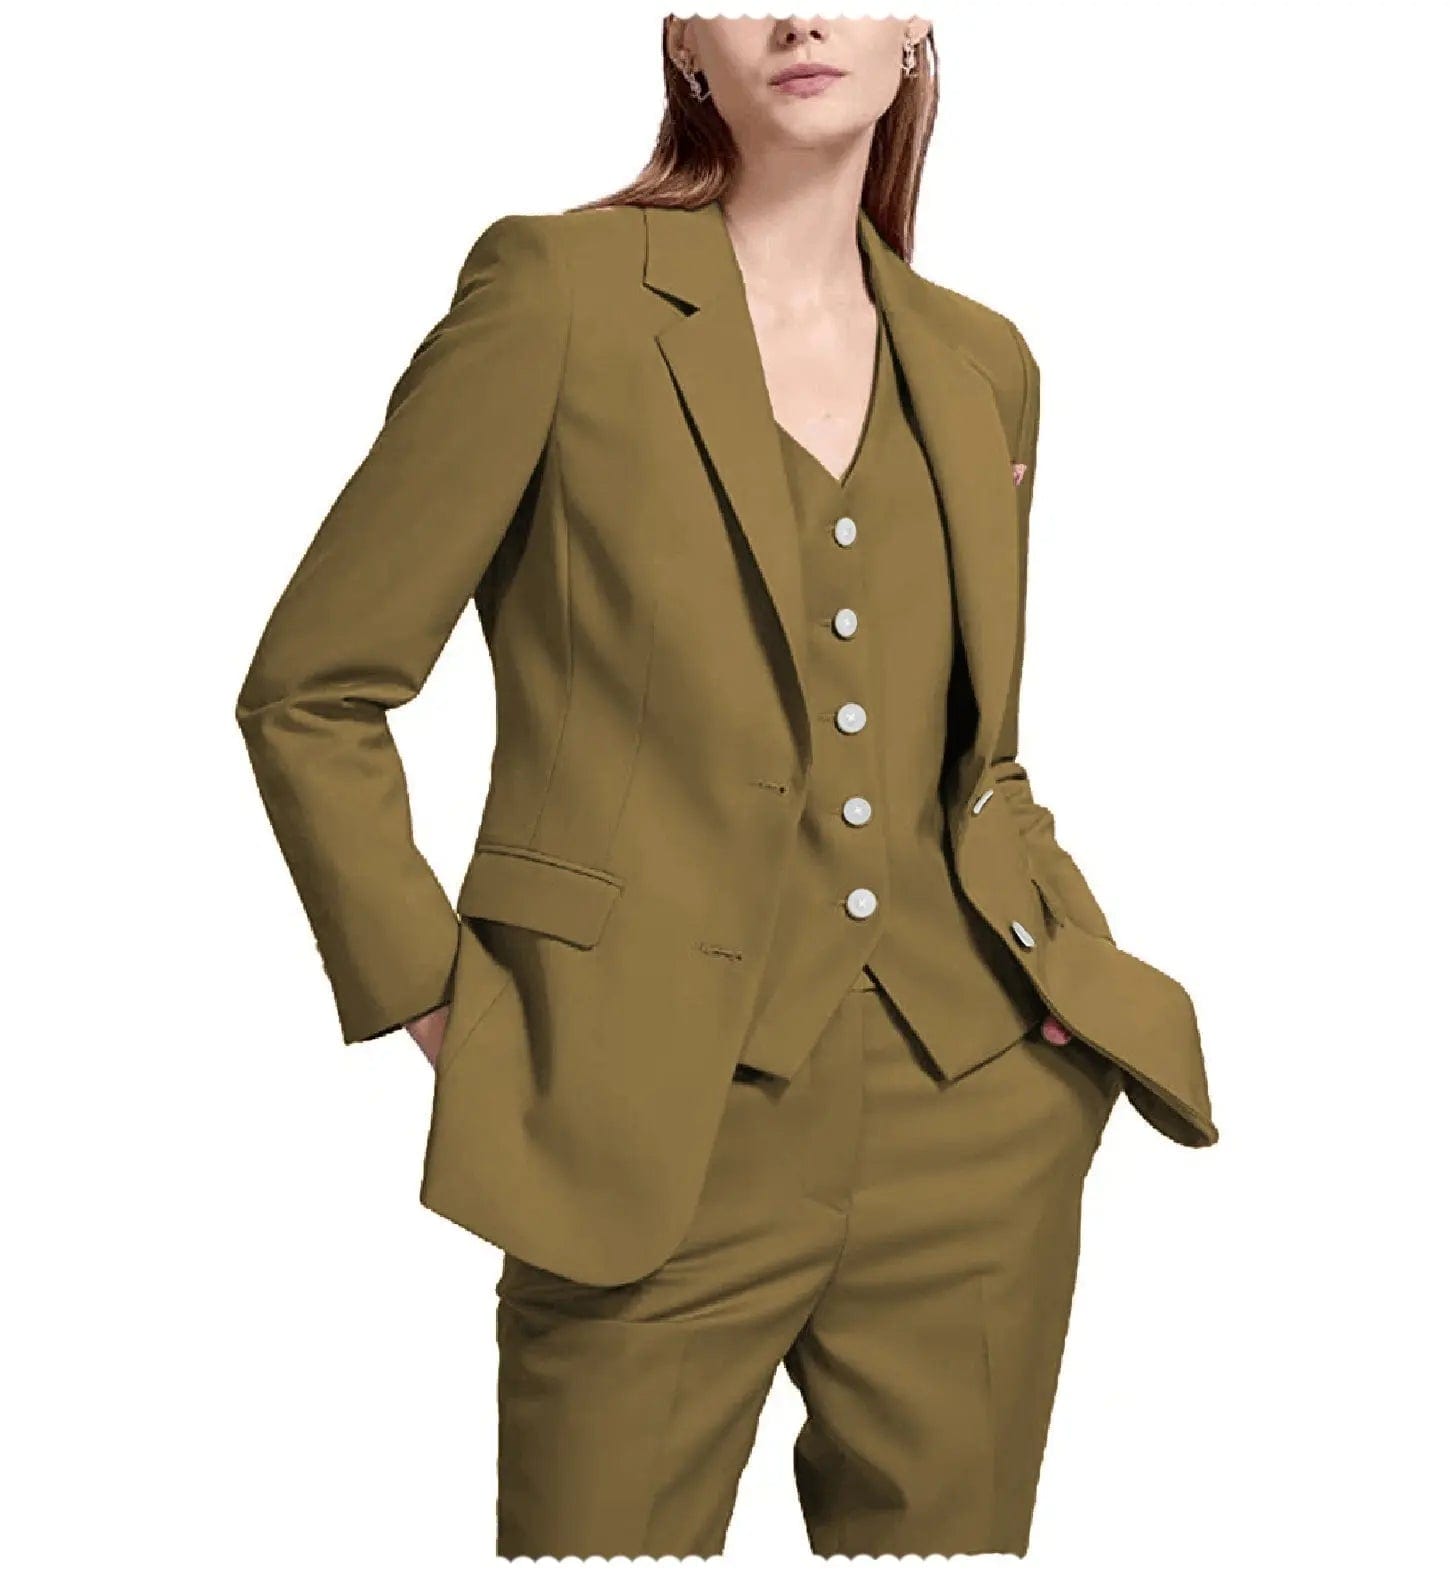 5 Business Casual Workwear Outfits with a Camel Blazer - LIFE WITH JAZZ